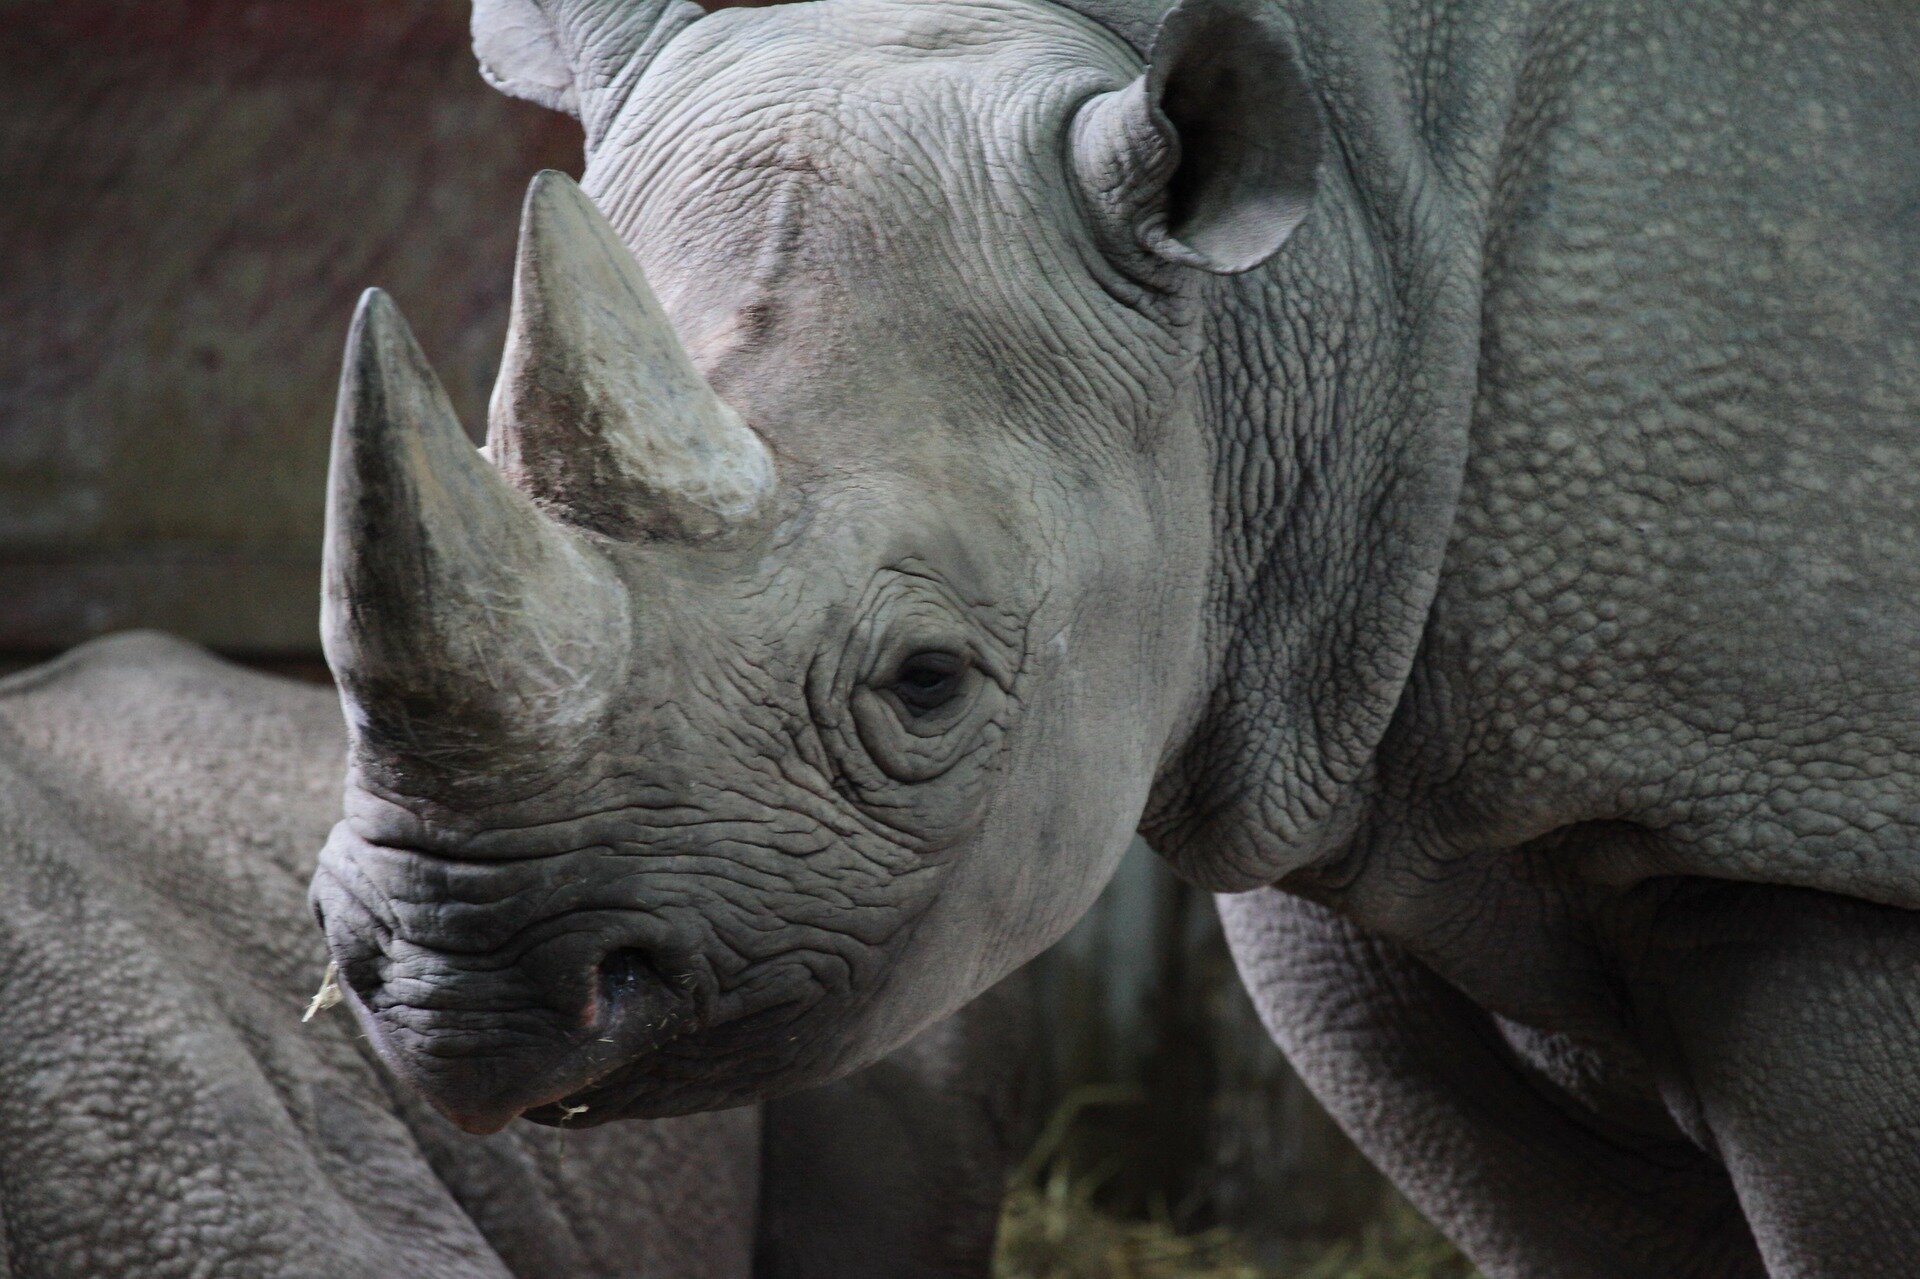 Rhino horn consumers reveal why a legal trade alone won't save rhinos